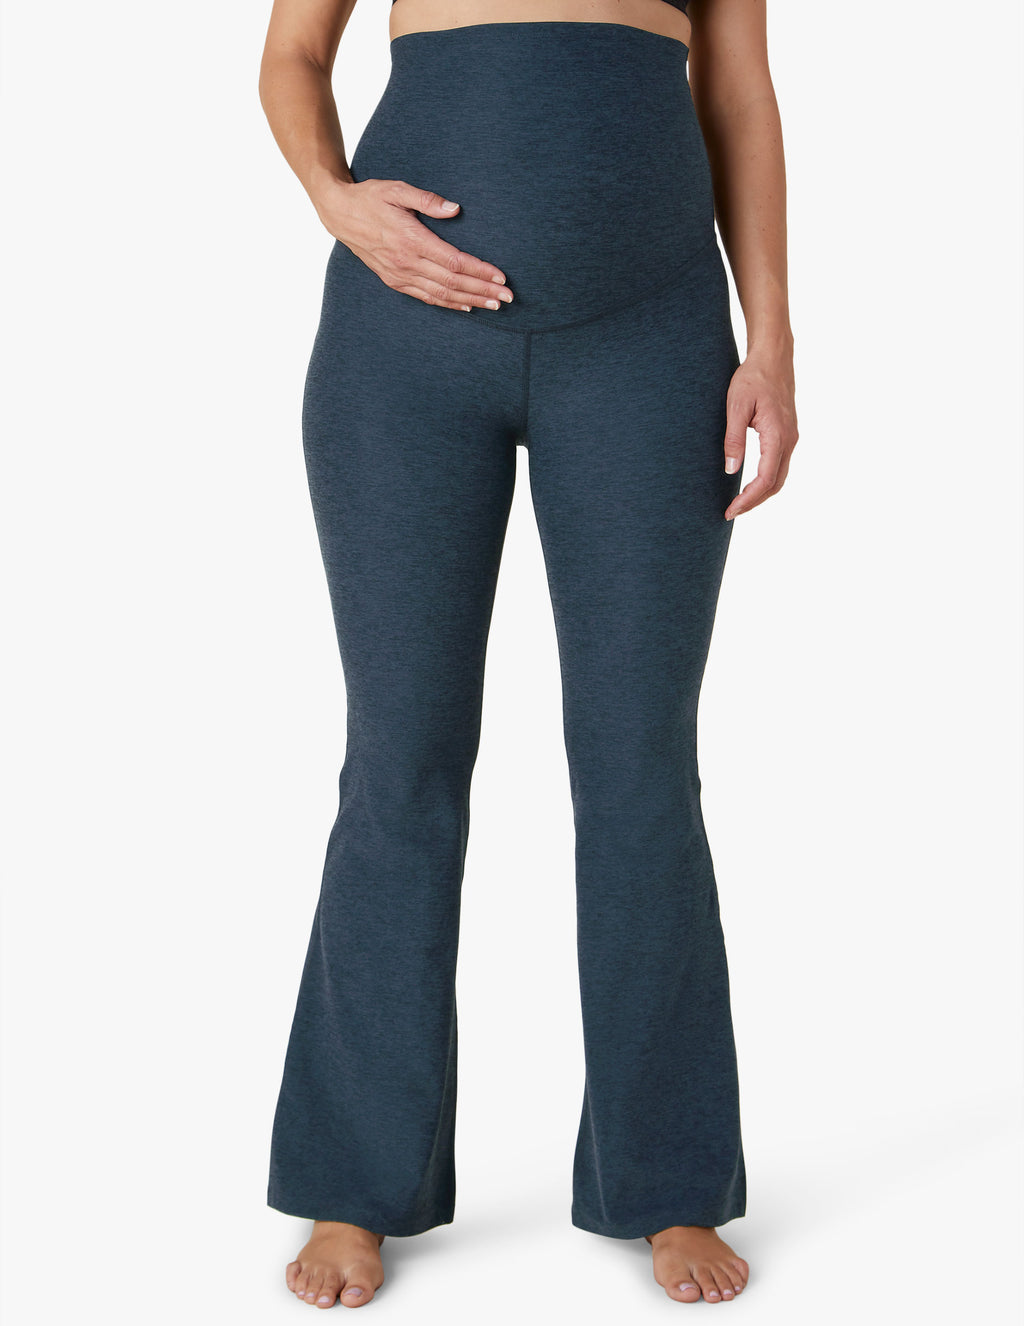 Spacedye All Day Flare Maternity Pant Secondary Image